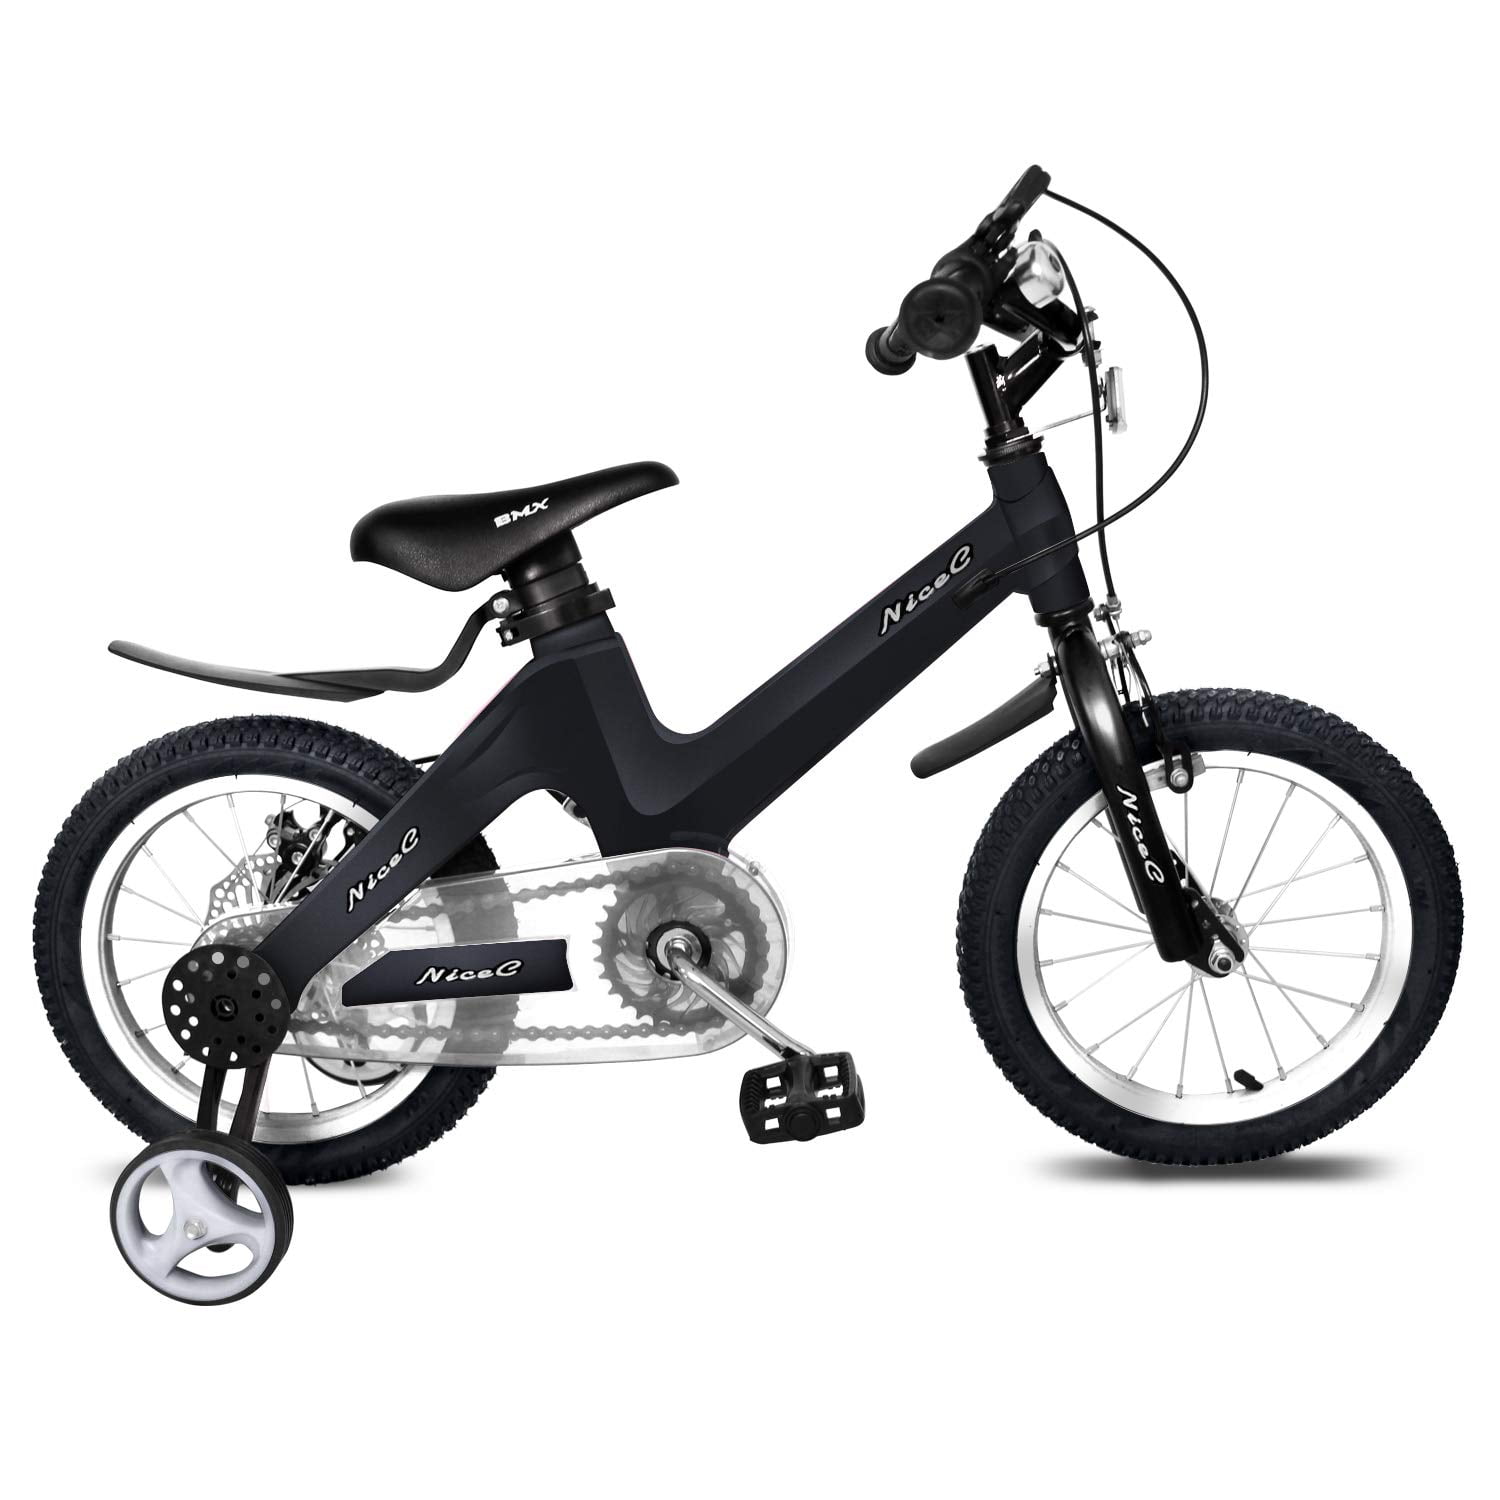 Kids BMX Bicycle Bike Outdoors Sports Steel Frame with Training Wheels 